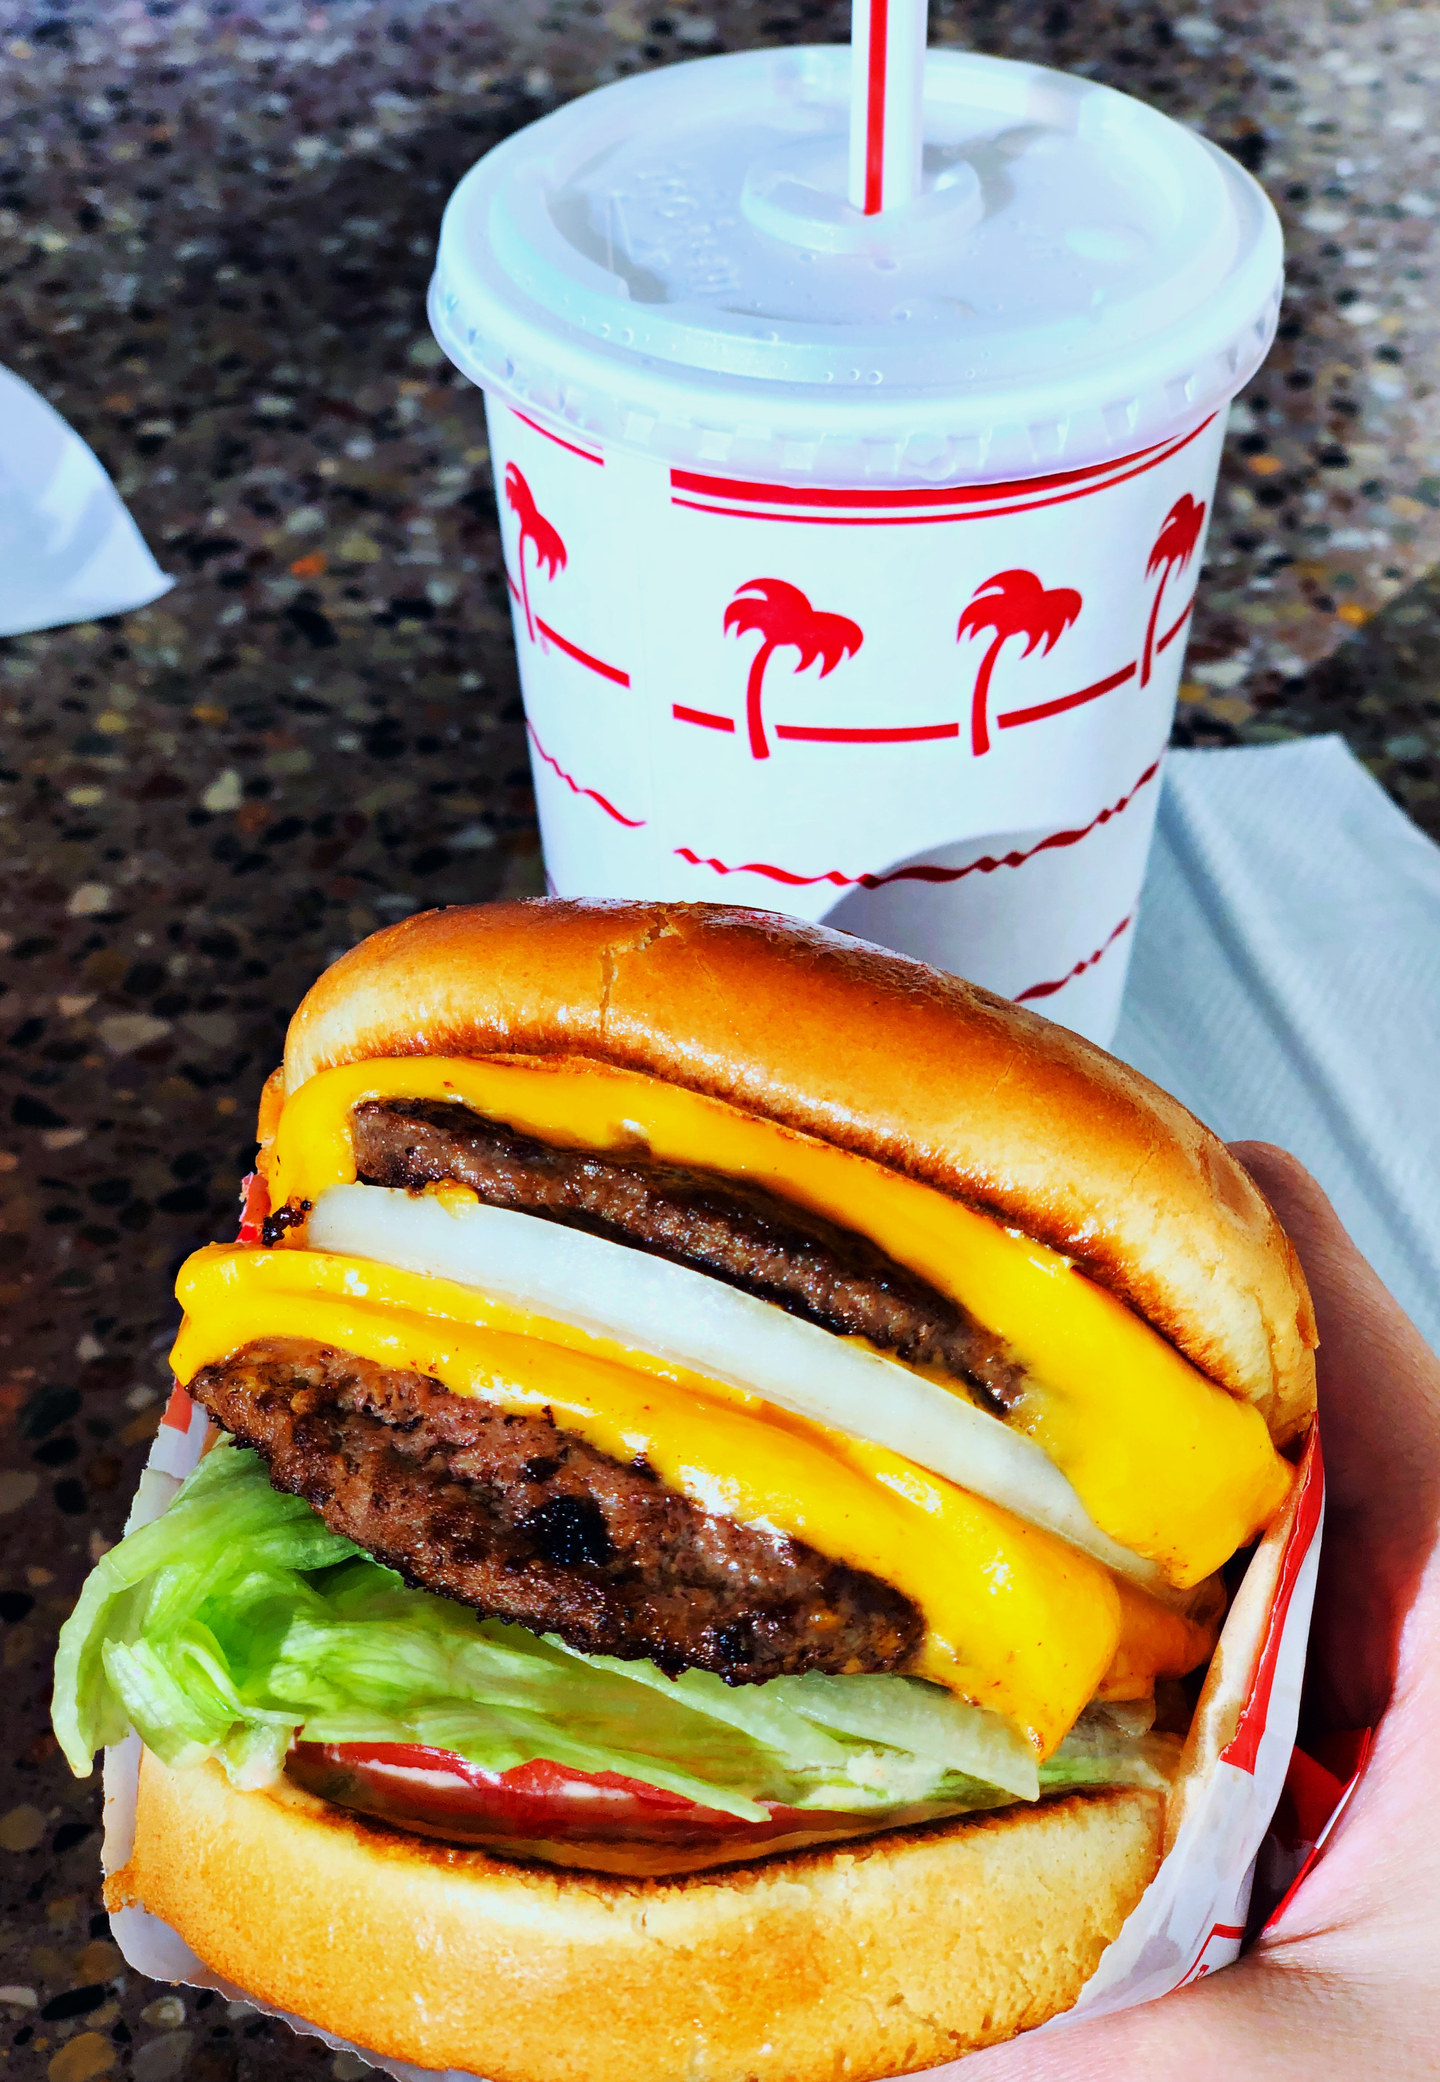 An In-N-Out burger and softdrink.